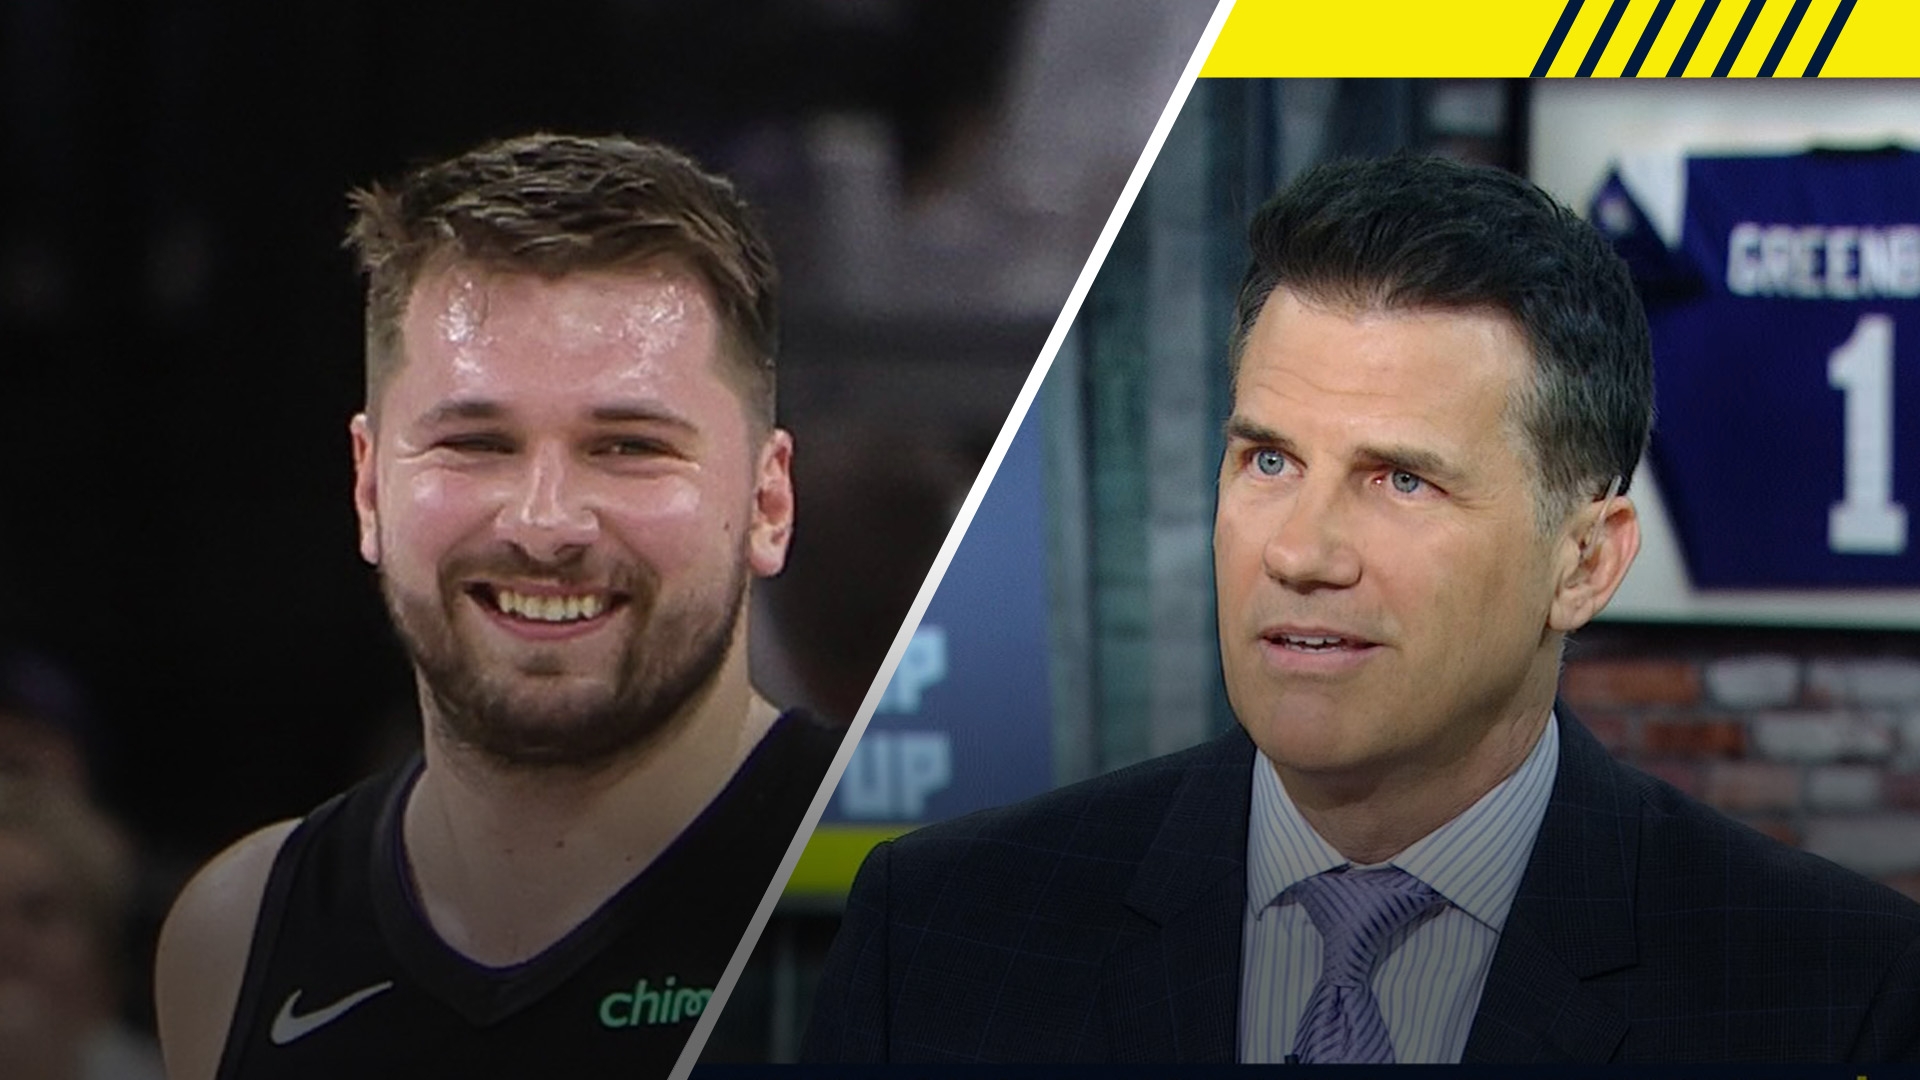 Alan Hahn: Luka Doncic has moved up to No. 1 player in NBA